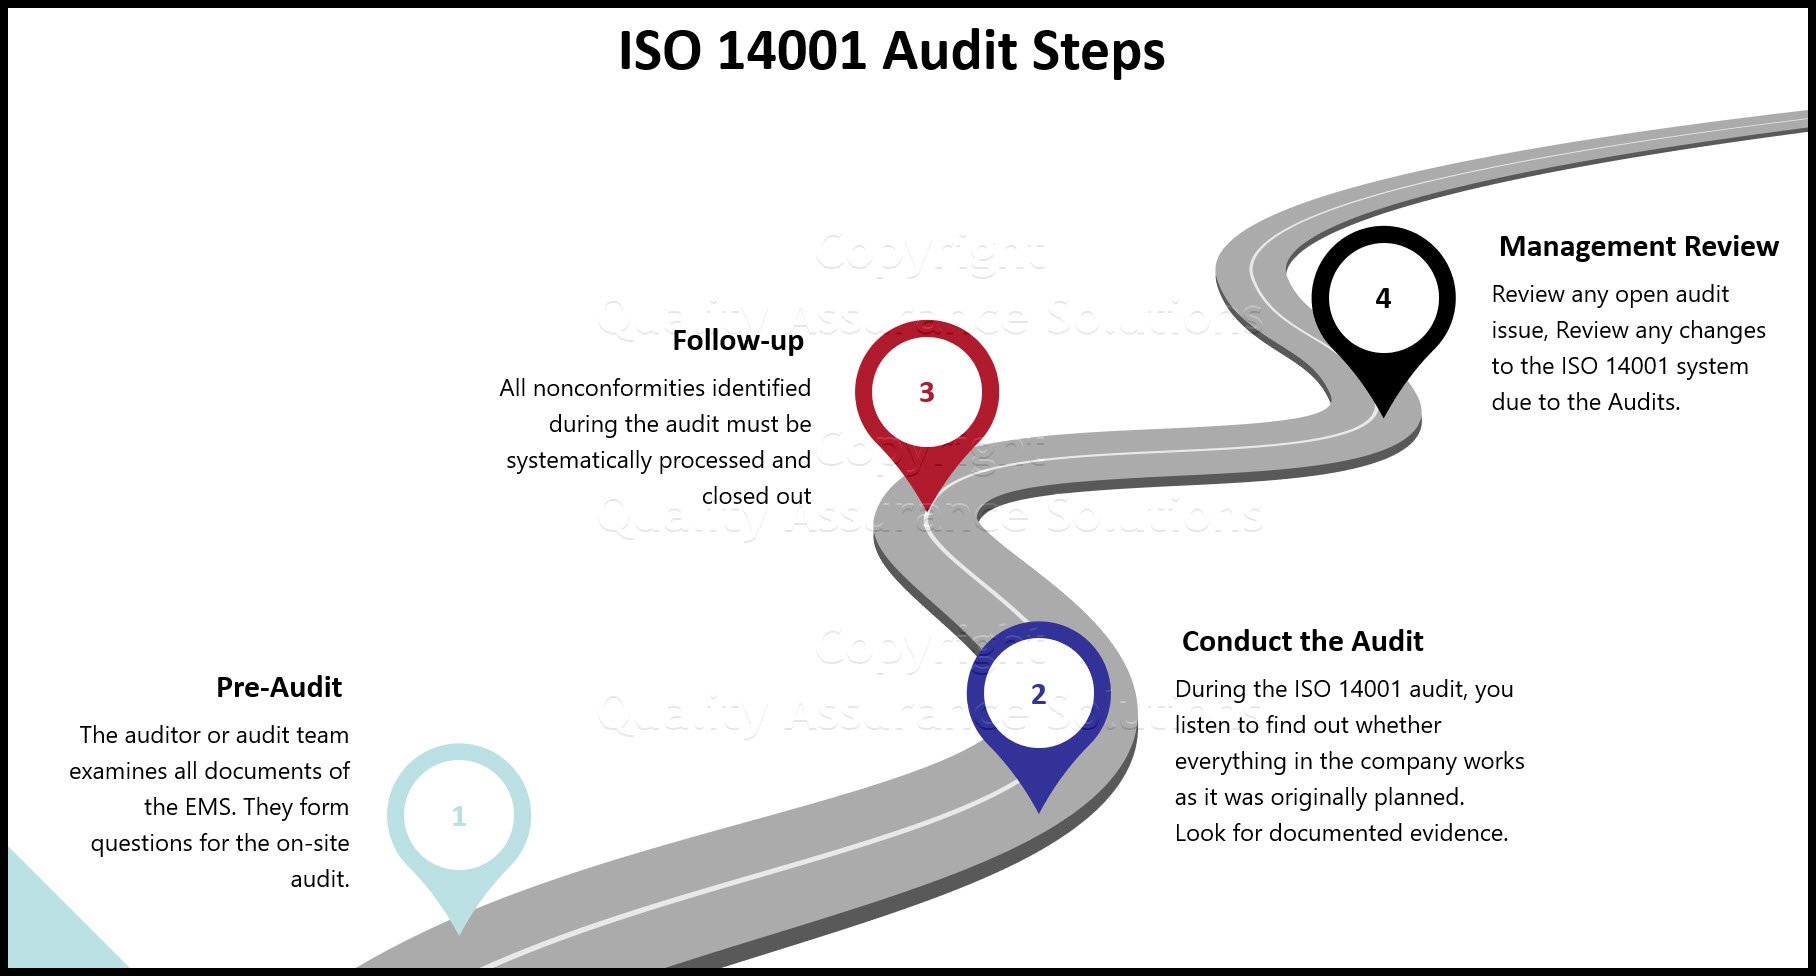 Preparing for your ISO 14001 audit includes conducting a pre-audit, reviewing ISO 19011, Management Review, selecting auditors, and many more steps. Review this article for the proper ISO 14001 steps. 